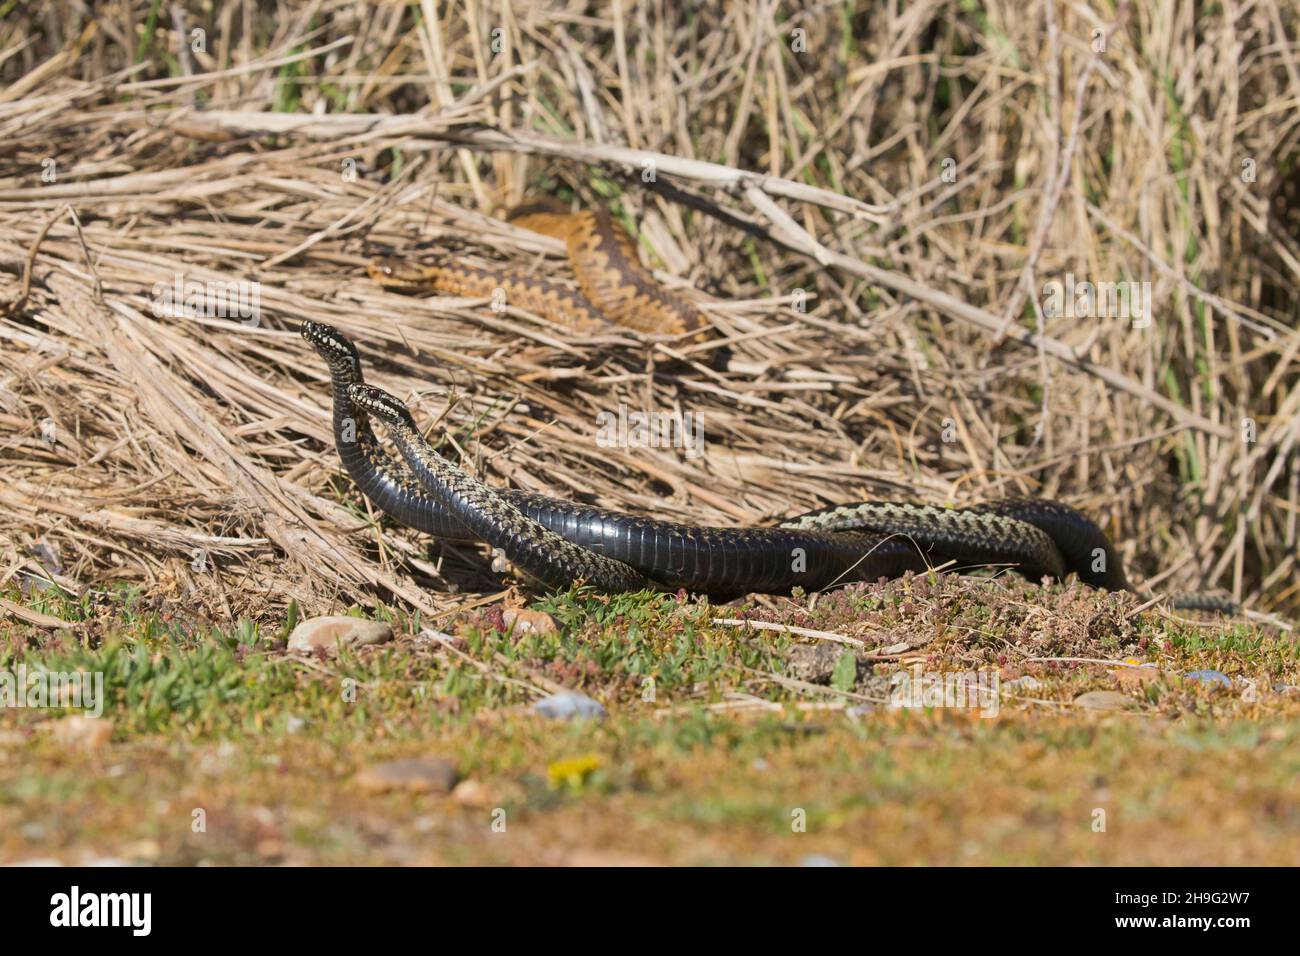 European Adder (Vipera berus) adult female basking and 2 adult males fighting, Suffolk, England, April Stock Photo